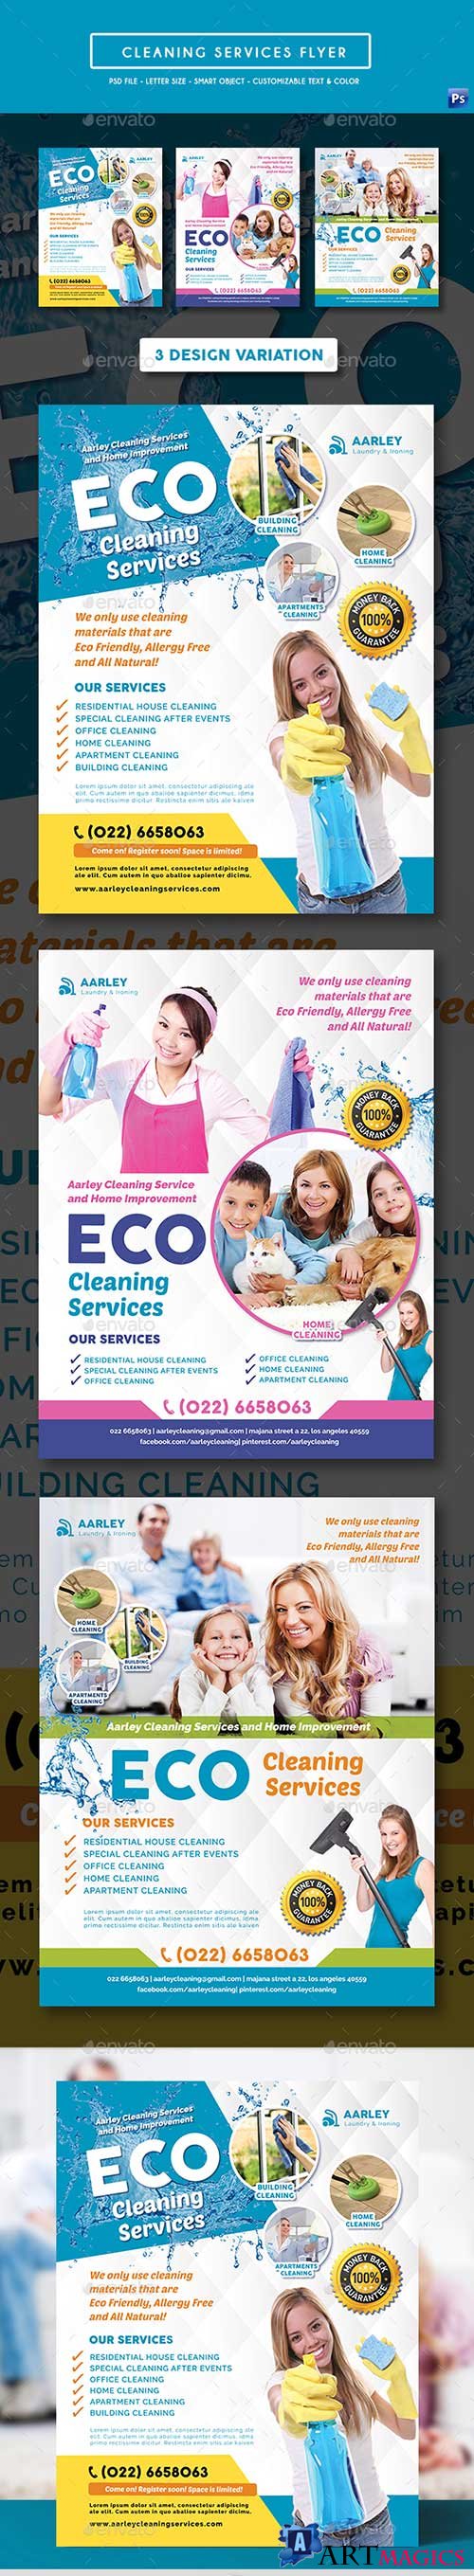 GR - Cleaning Services Flyer 19585464